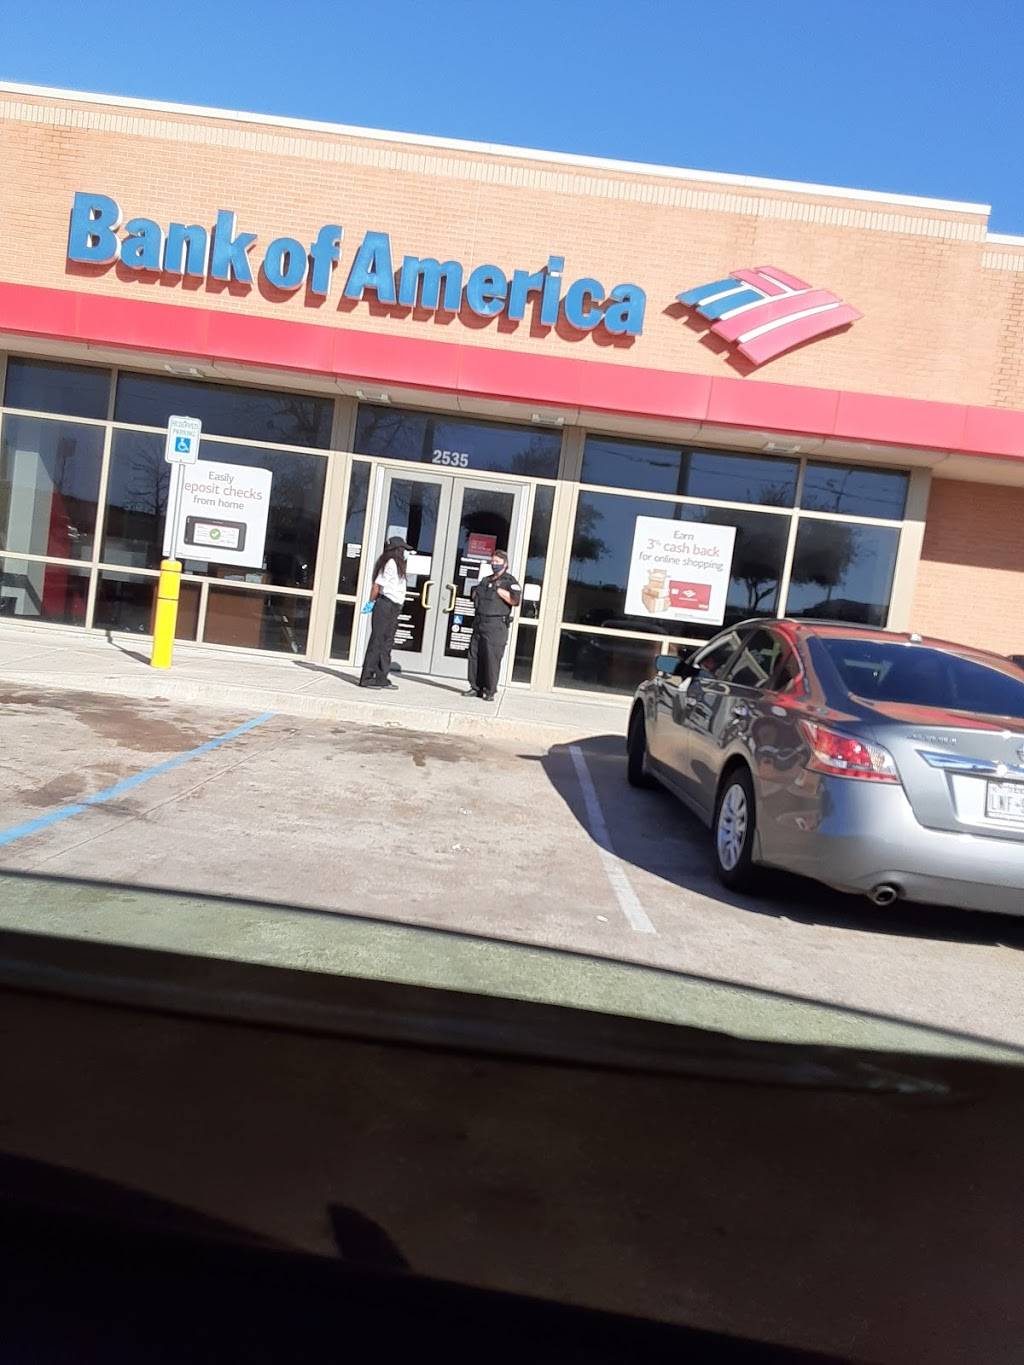 Bank of America (with Drive-thru services) | 2535 W Wheatland Rd, Dallas, TX 75237 | Phone: (972) 283-0108